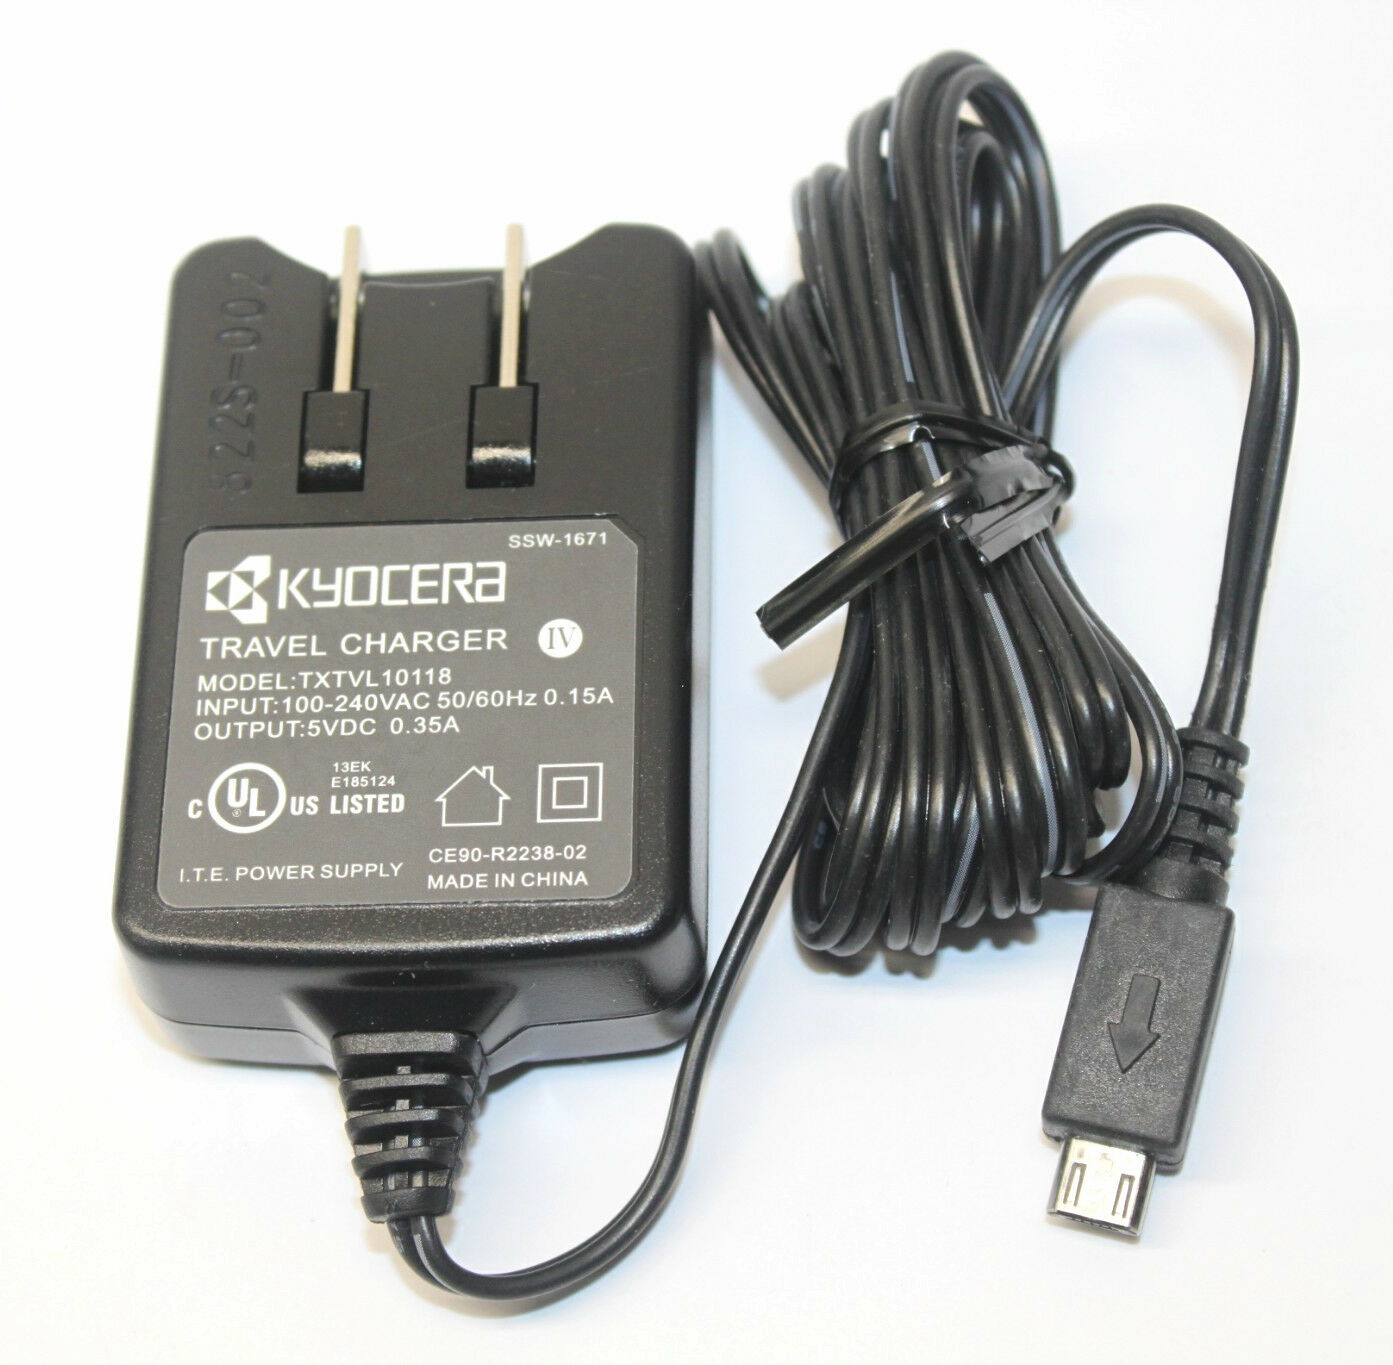 Audiovox TRC-4 ITE Power Supply AC Adapter Travel Charger Output DC 5V 750mA Model Number: TRC-4 Brand: Audiovox Type